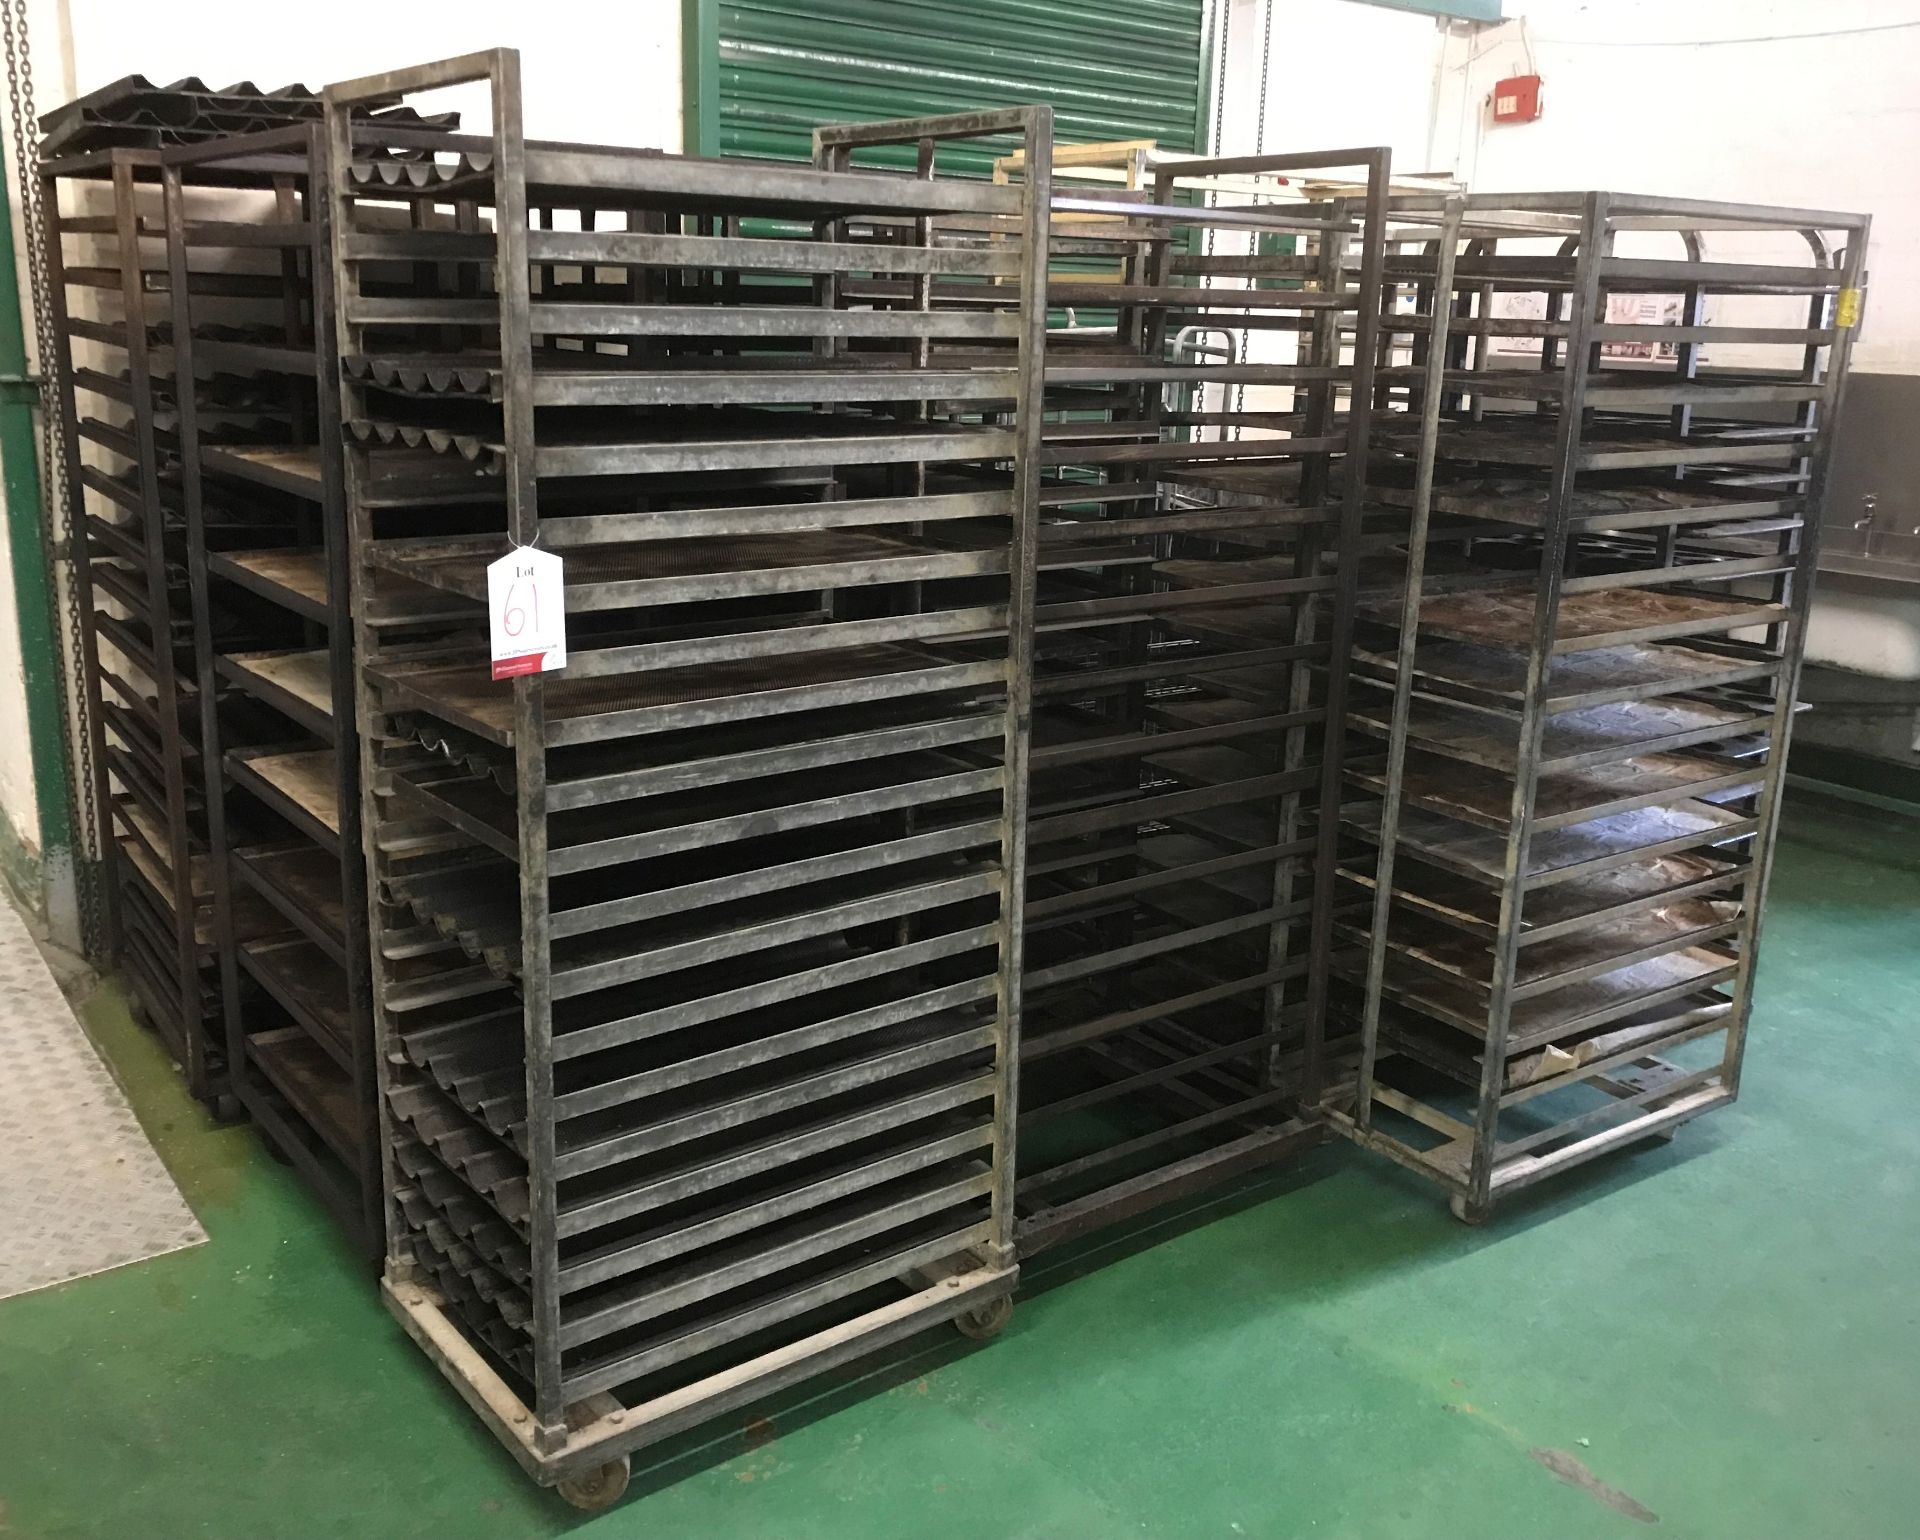 12 x Various Bakery Racks - As Pictured